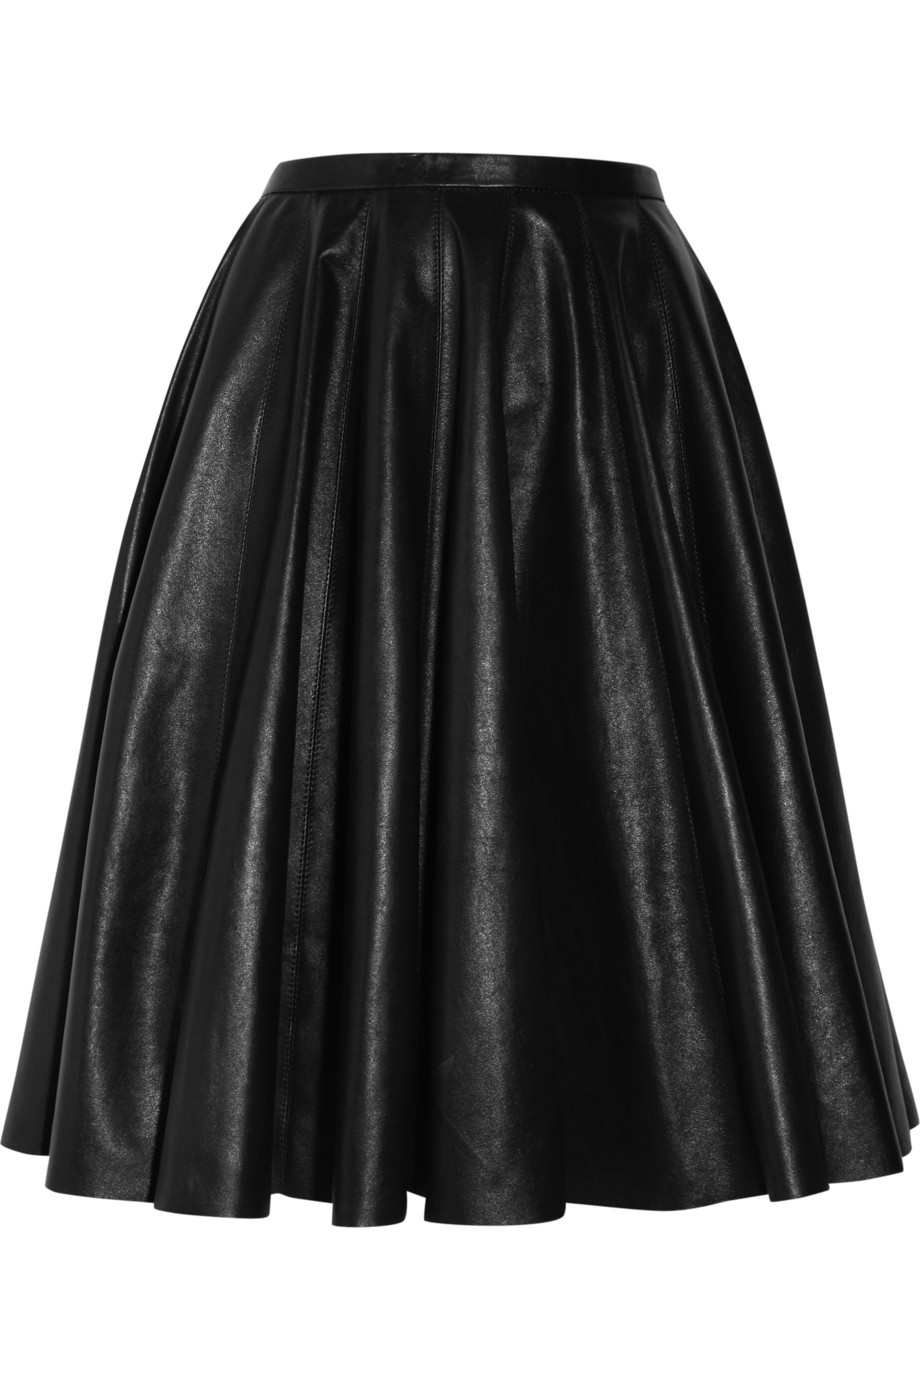 Mcq By Alexander Mcqueen The Pleated Leather Skirt in Black | Lyst